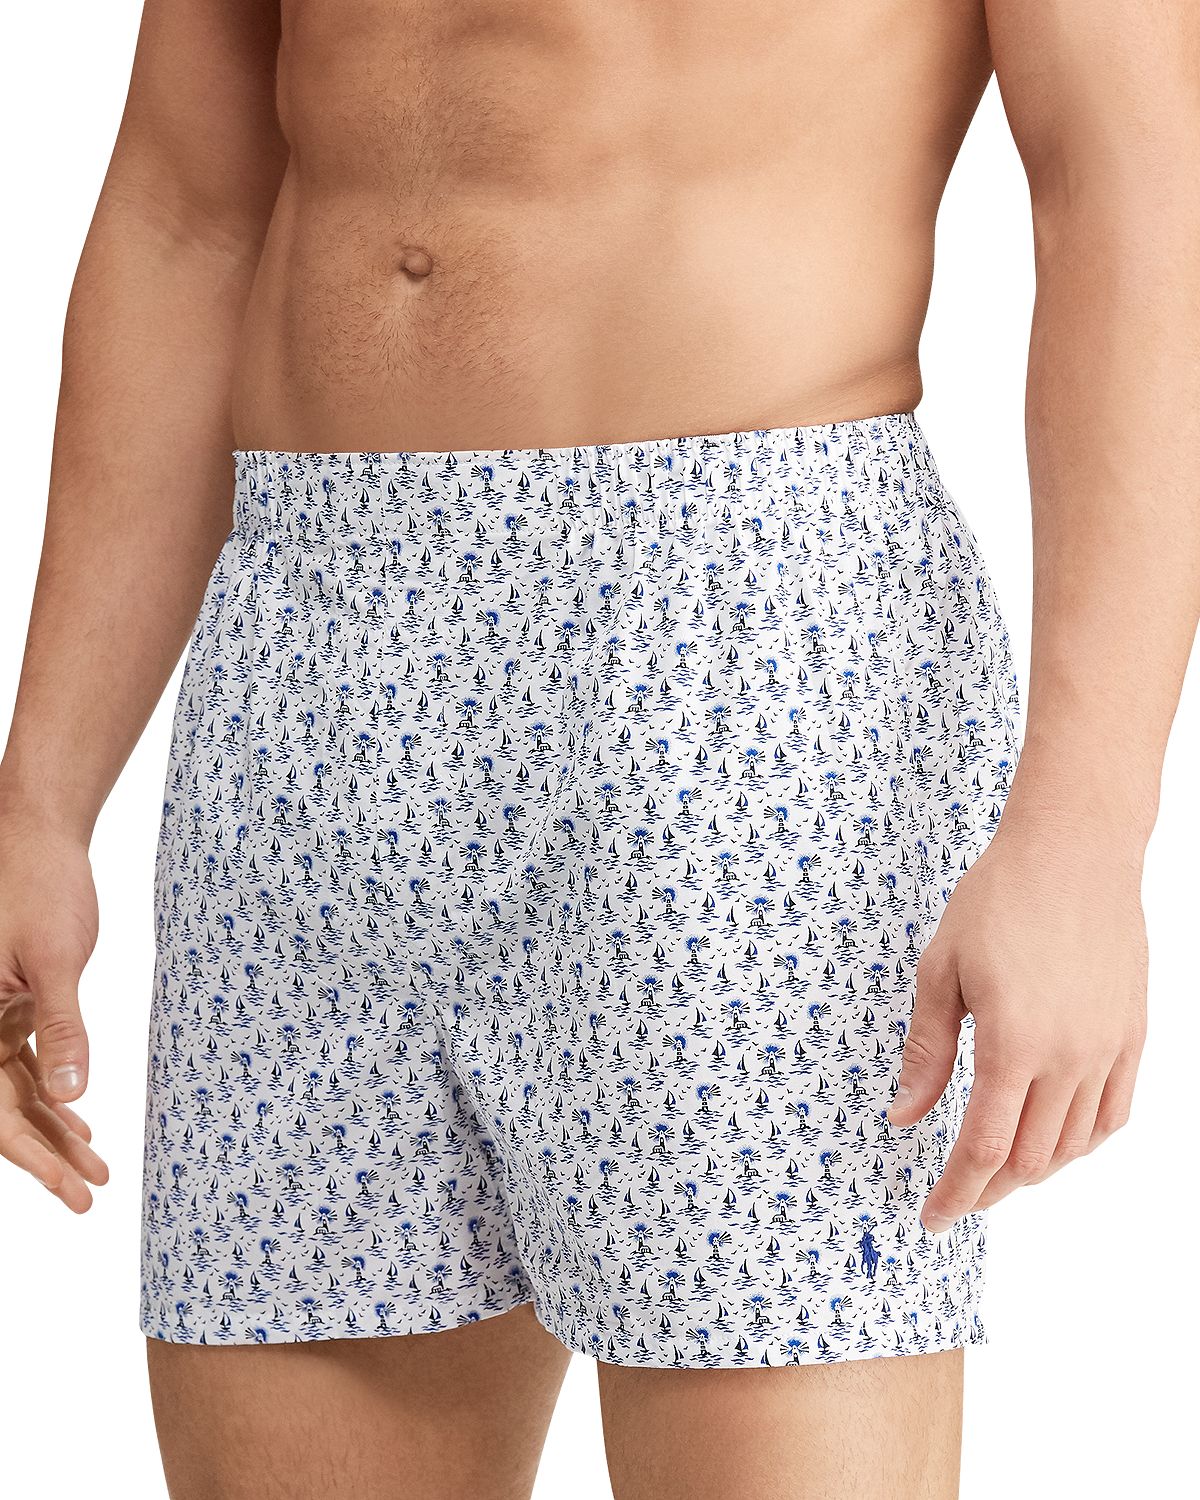 Polo Ralph Lauren Printed Boxers Pack Of 3 White/Blue